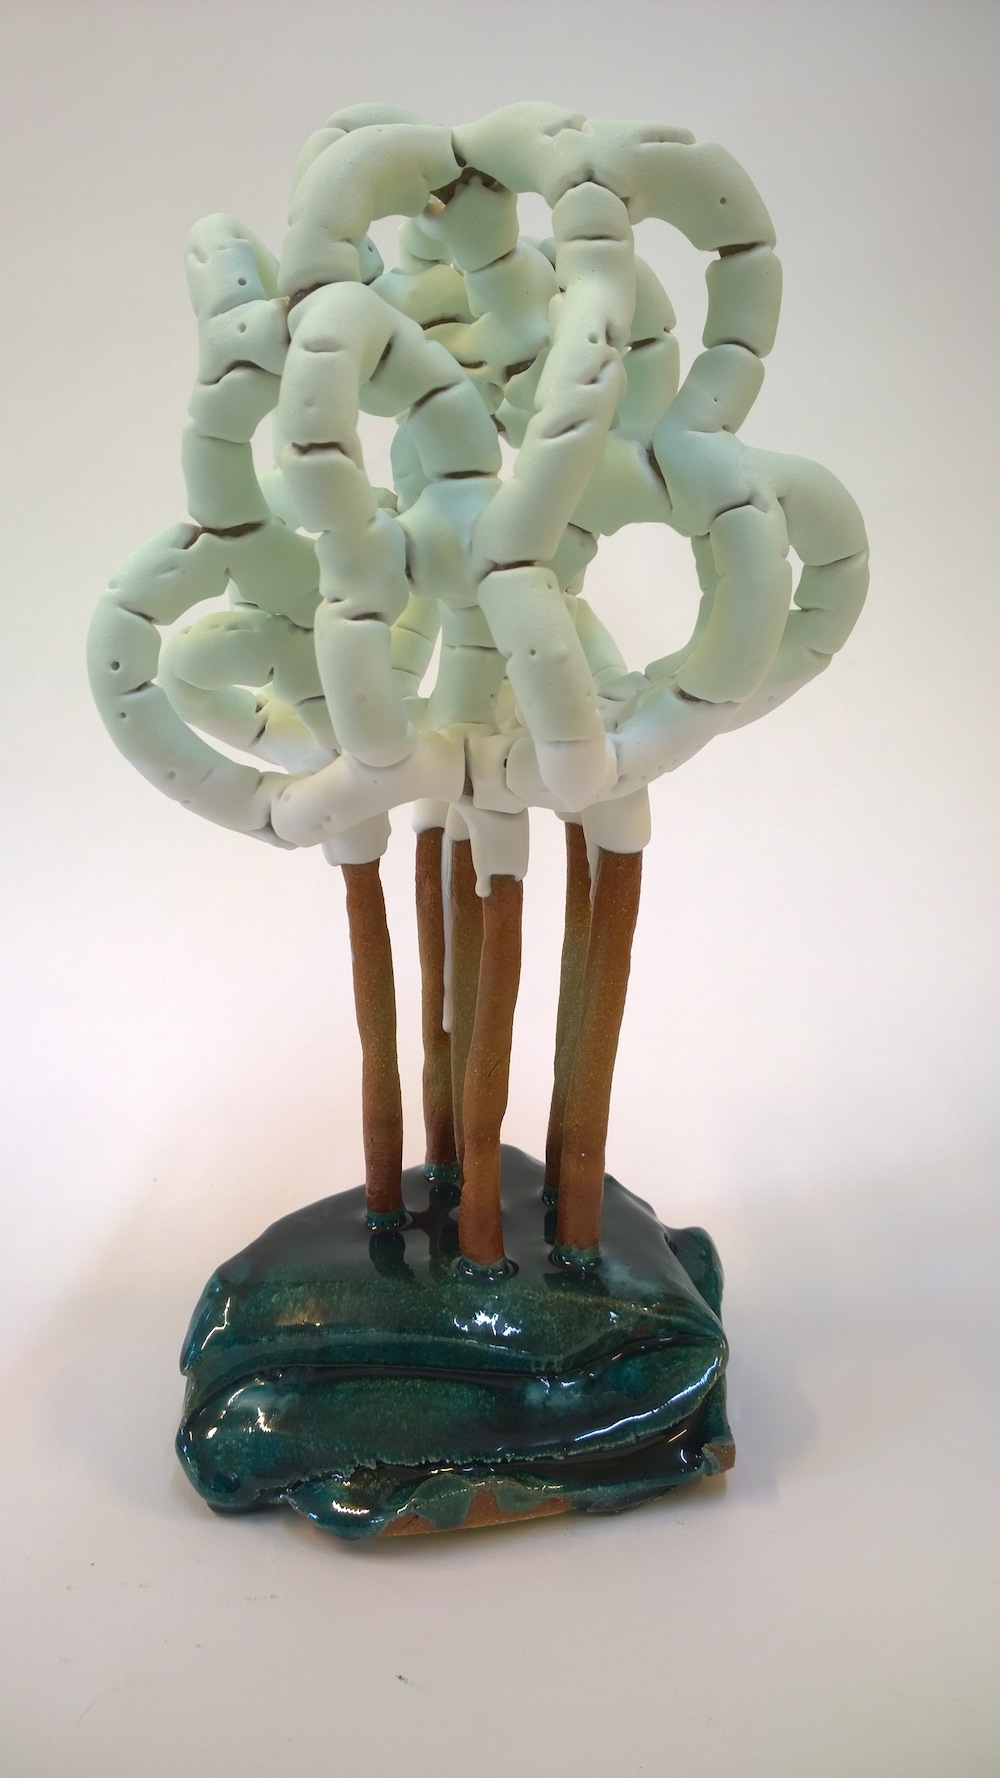 Green and White Cloud, 2014